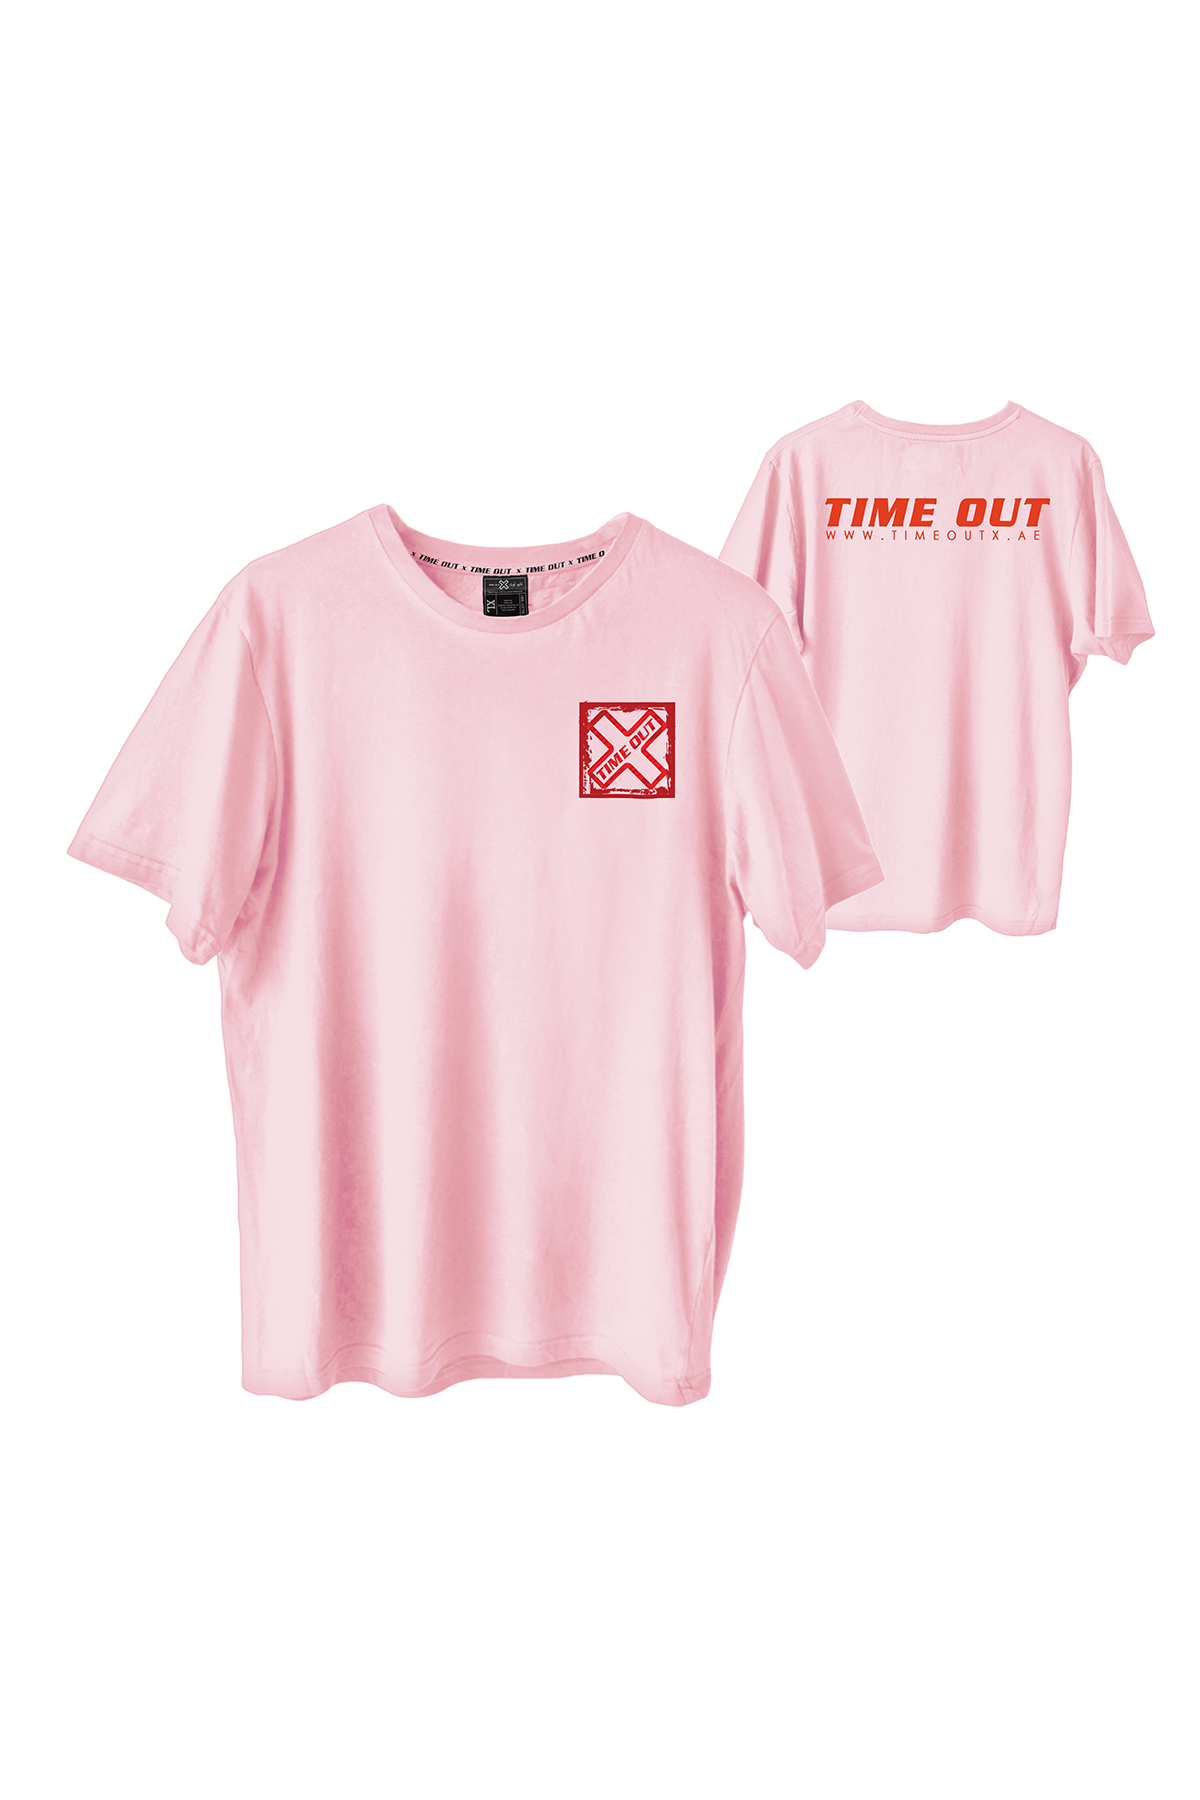 Time-Out-X-Signature-Men’s-Pastel-Pink-Cotton-T-Shirt—Front-and-Back